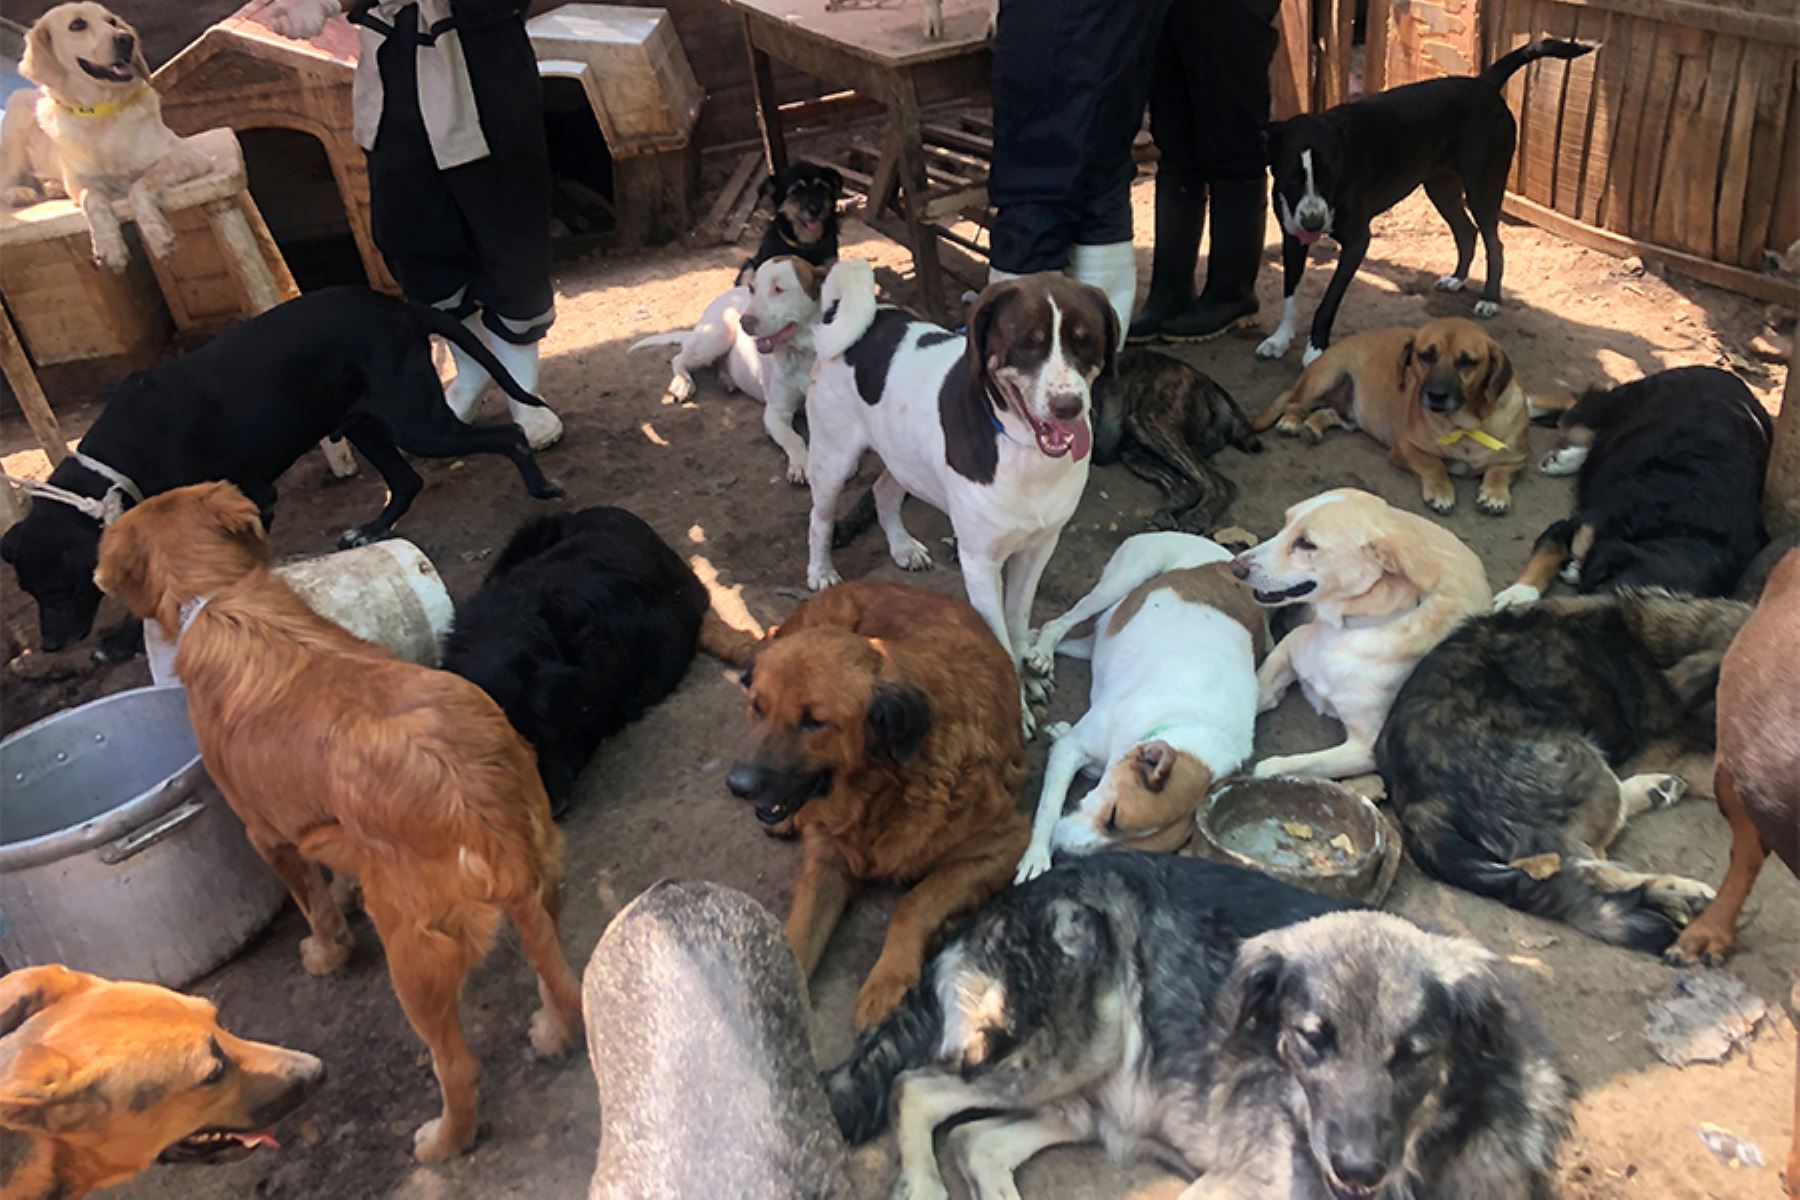 The Antofagasta District Court orders the local police not to issue an arrest warrant against the owner of the 22 dogs, who must relocate half of them because there is no space to keep them.